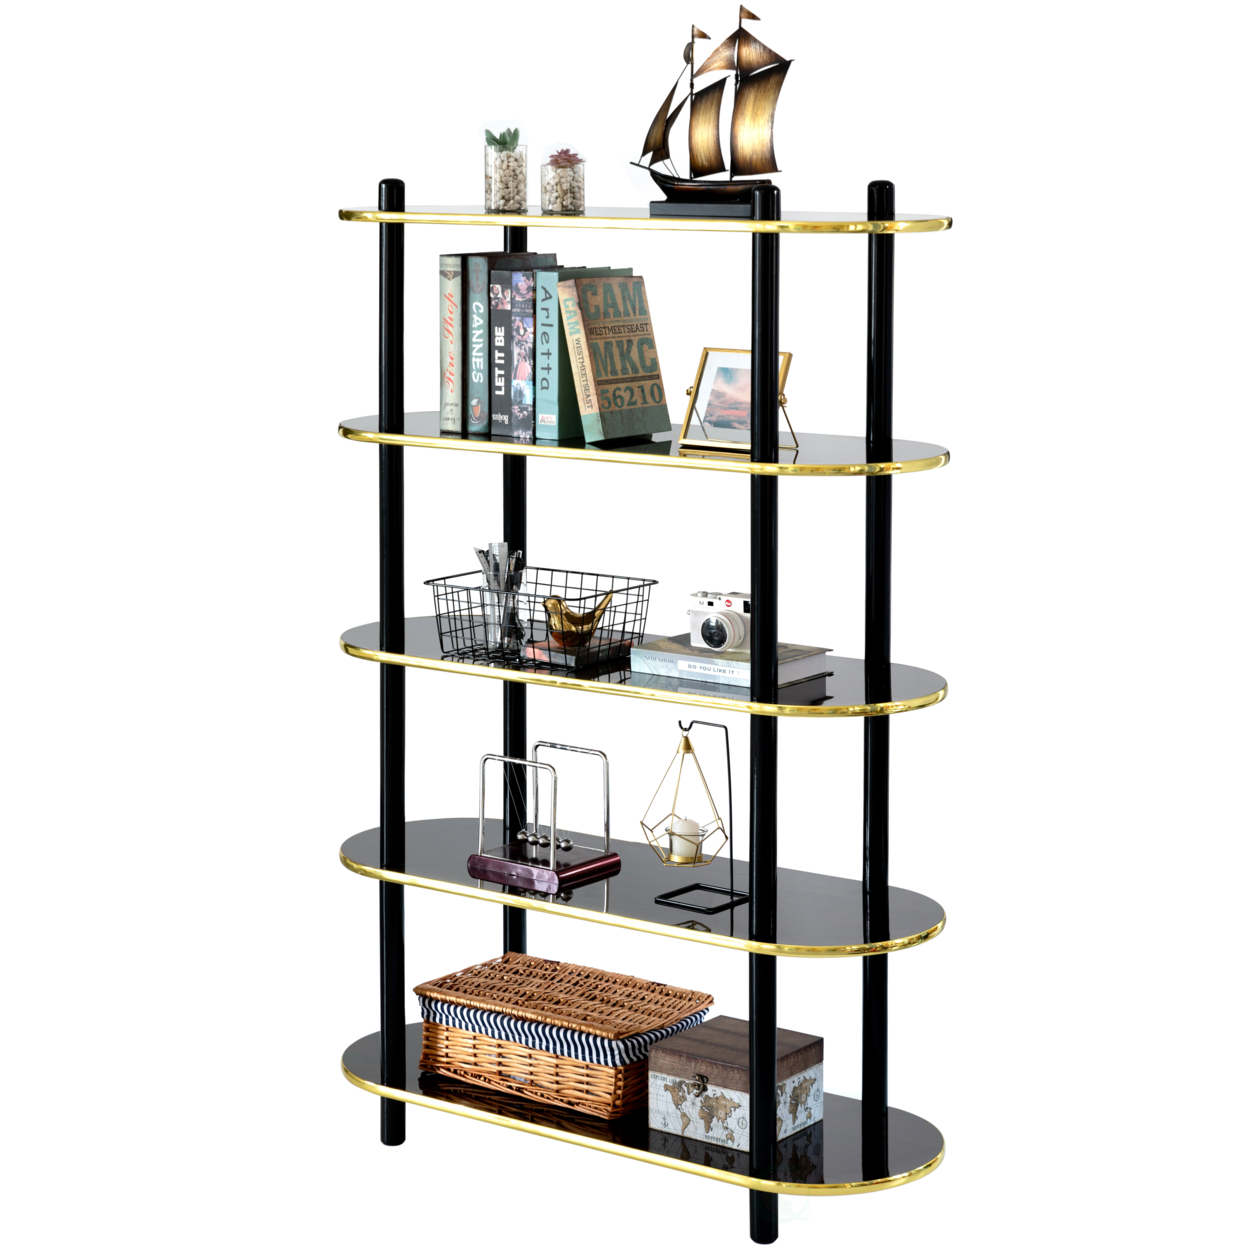 5 Tier Open Bookshelf, Contemporary Classic Modern Style Free Standing Wood Display Rack Unit for Collections,ï¿½59" Height Etagere Bookcase - Brown